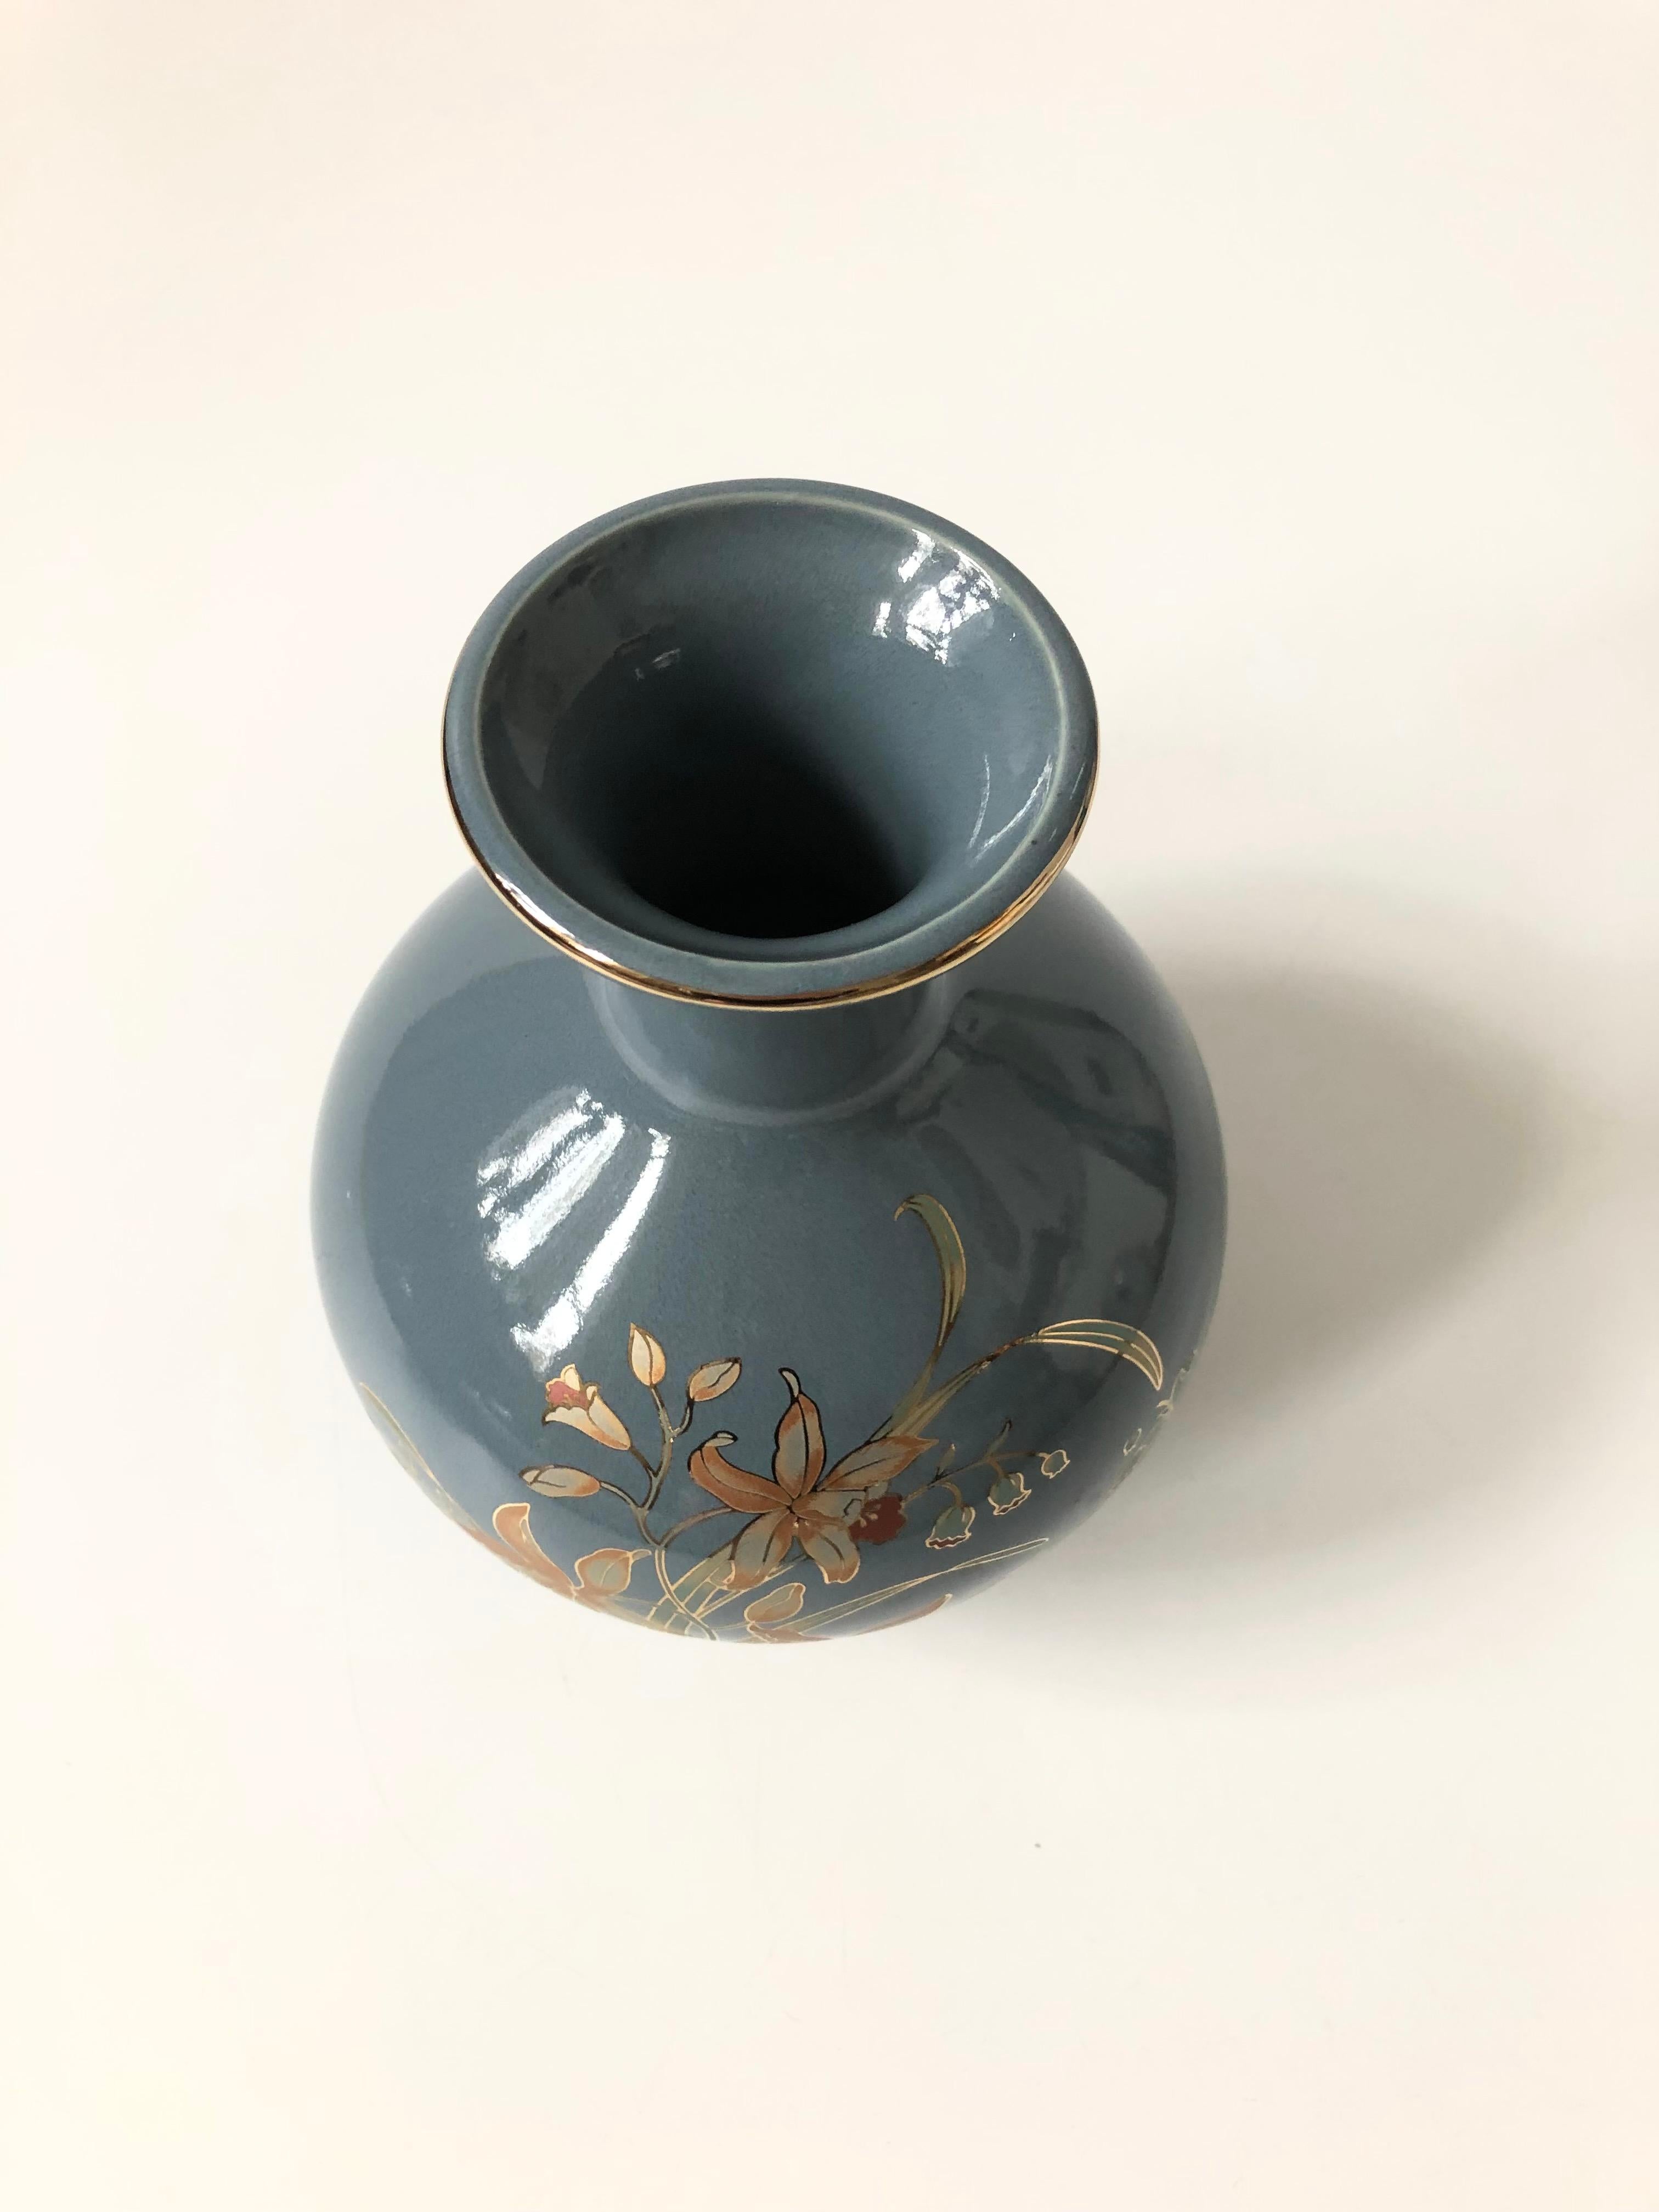 A lovely vintage ceramic vase. Glossy blue finish with a highly detailed botanic design in gold. Made in Japan.
 